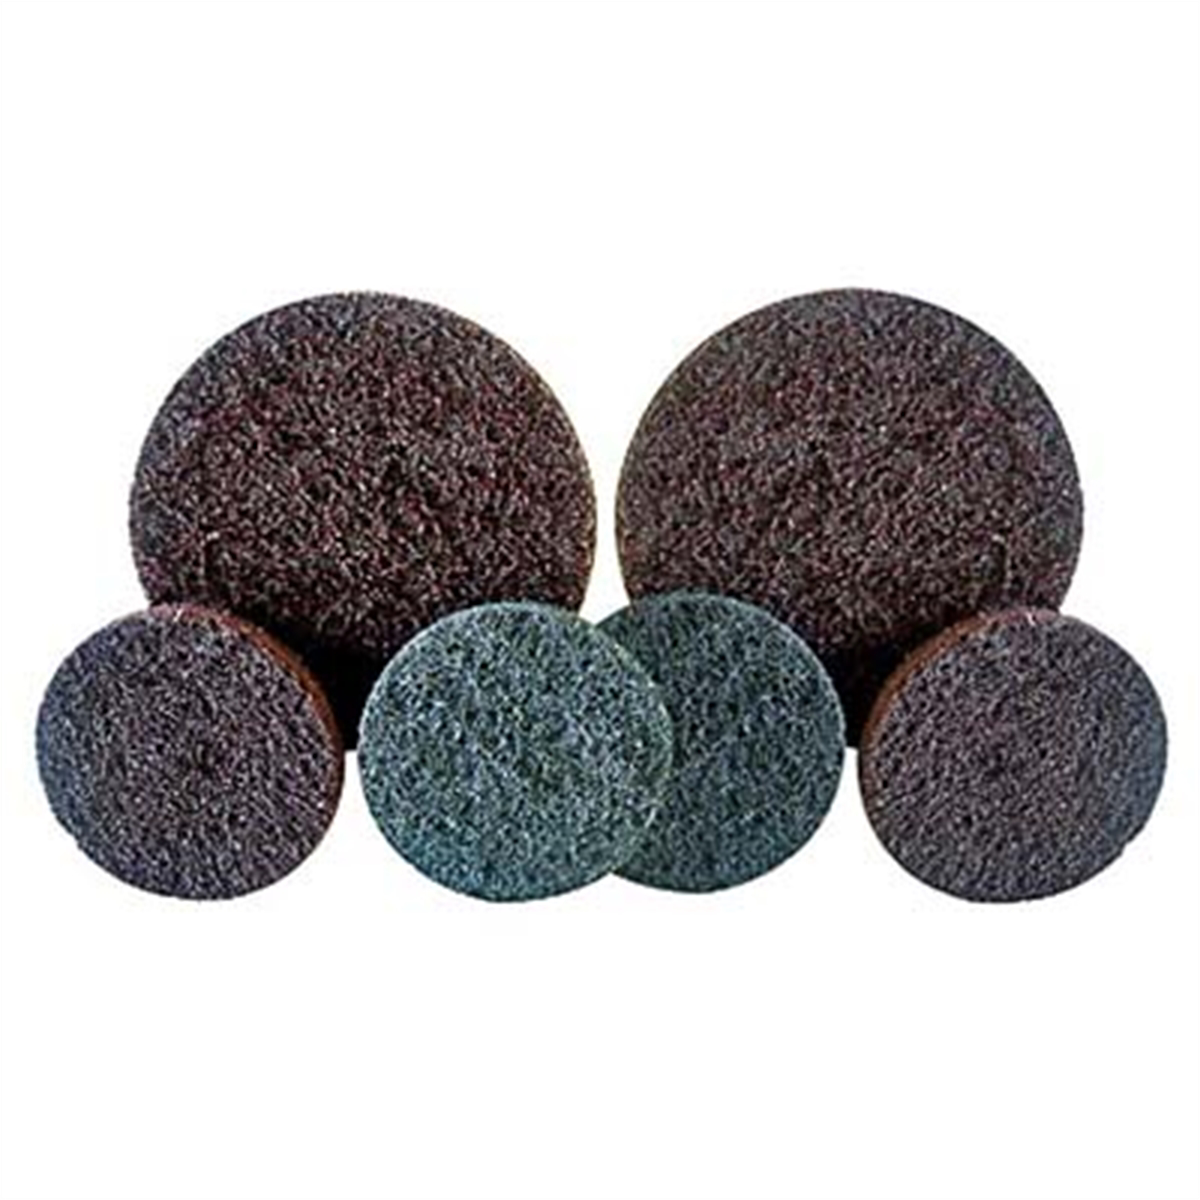 Surface Conditioning Discs Aluminum Oxide 2 Inch Coarse 25 Pack